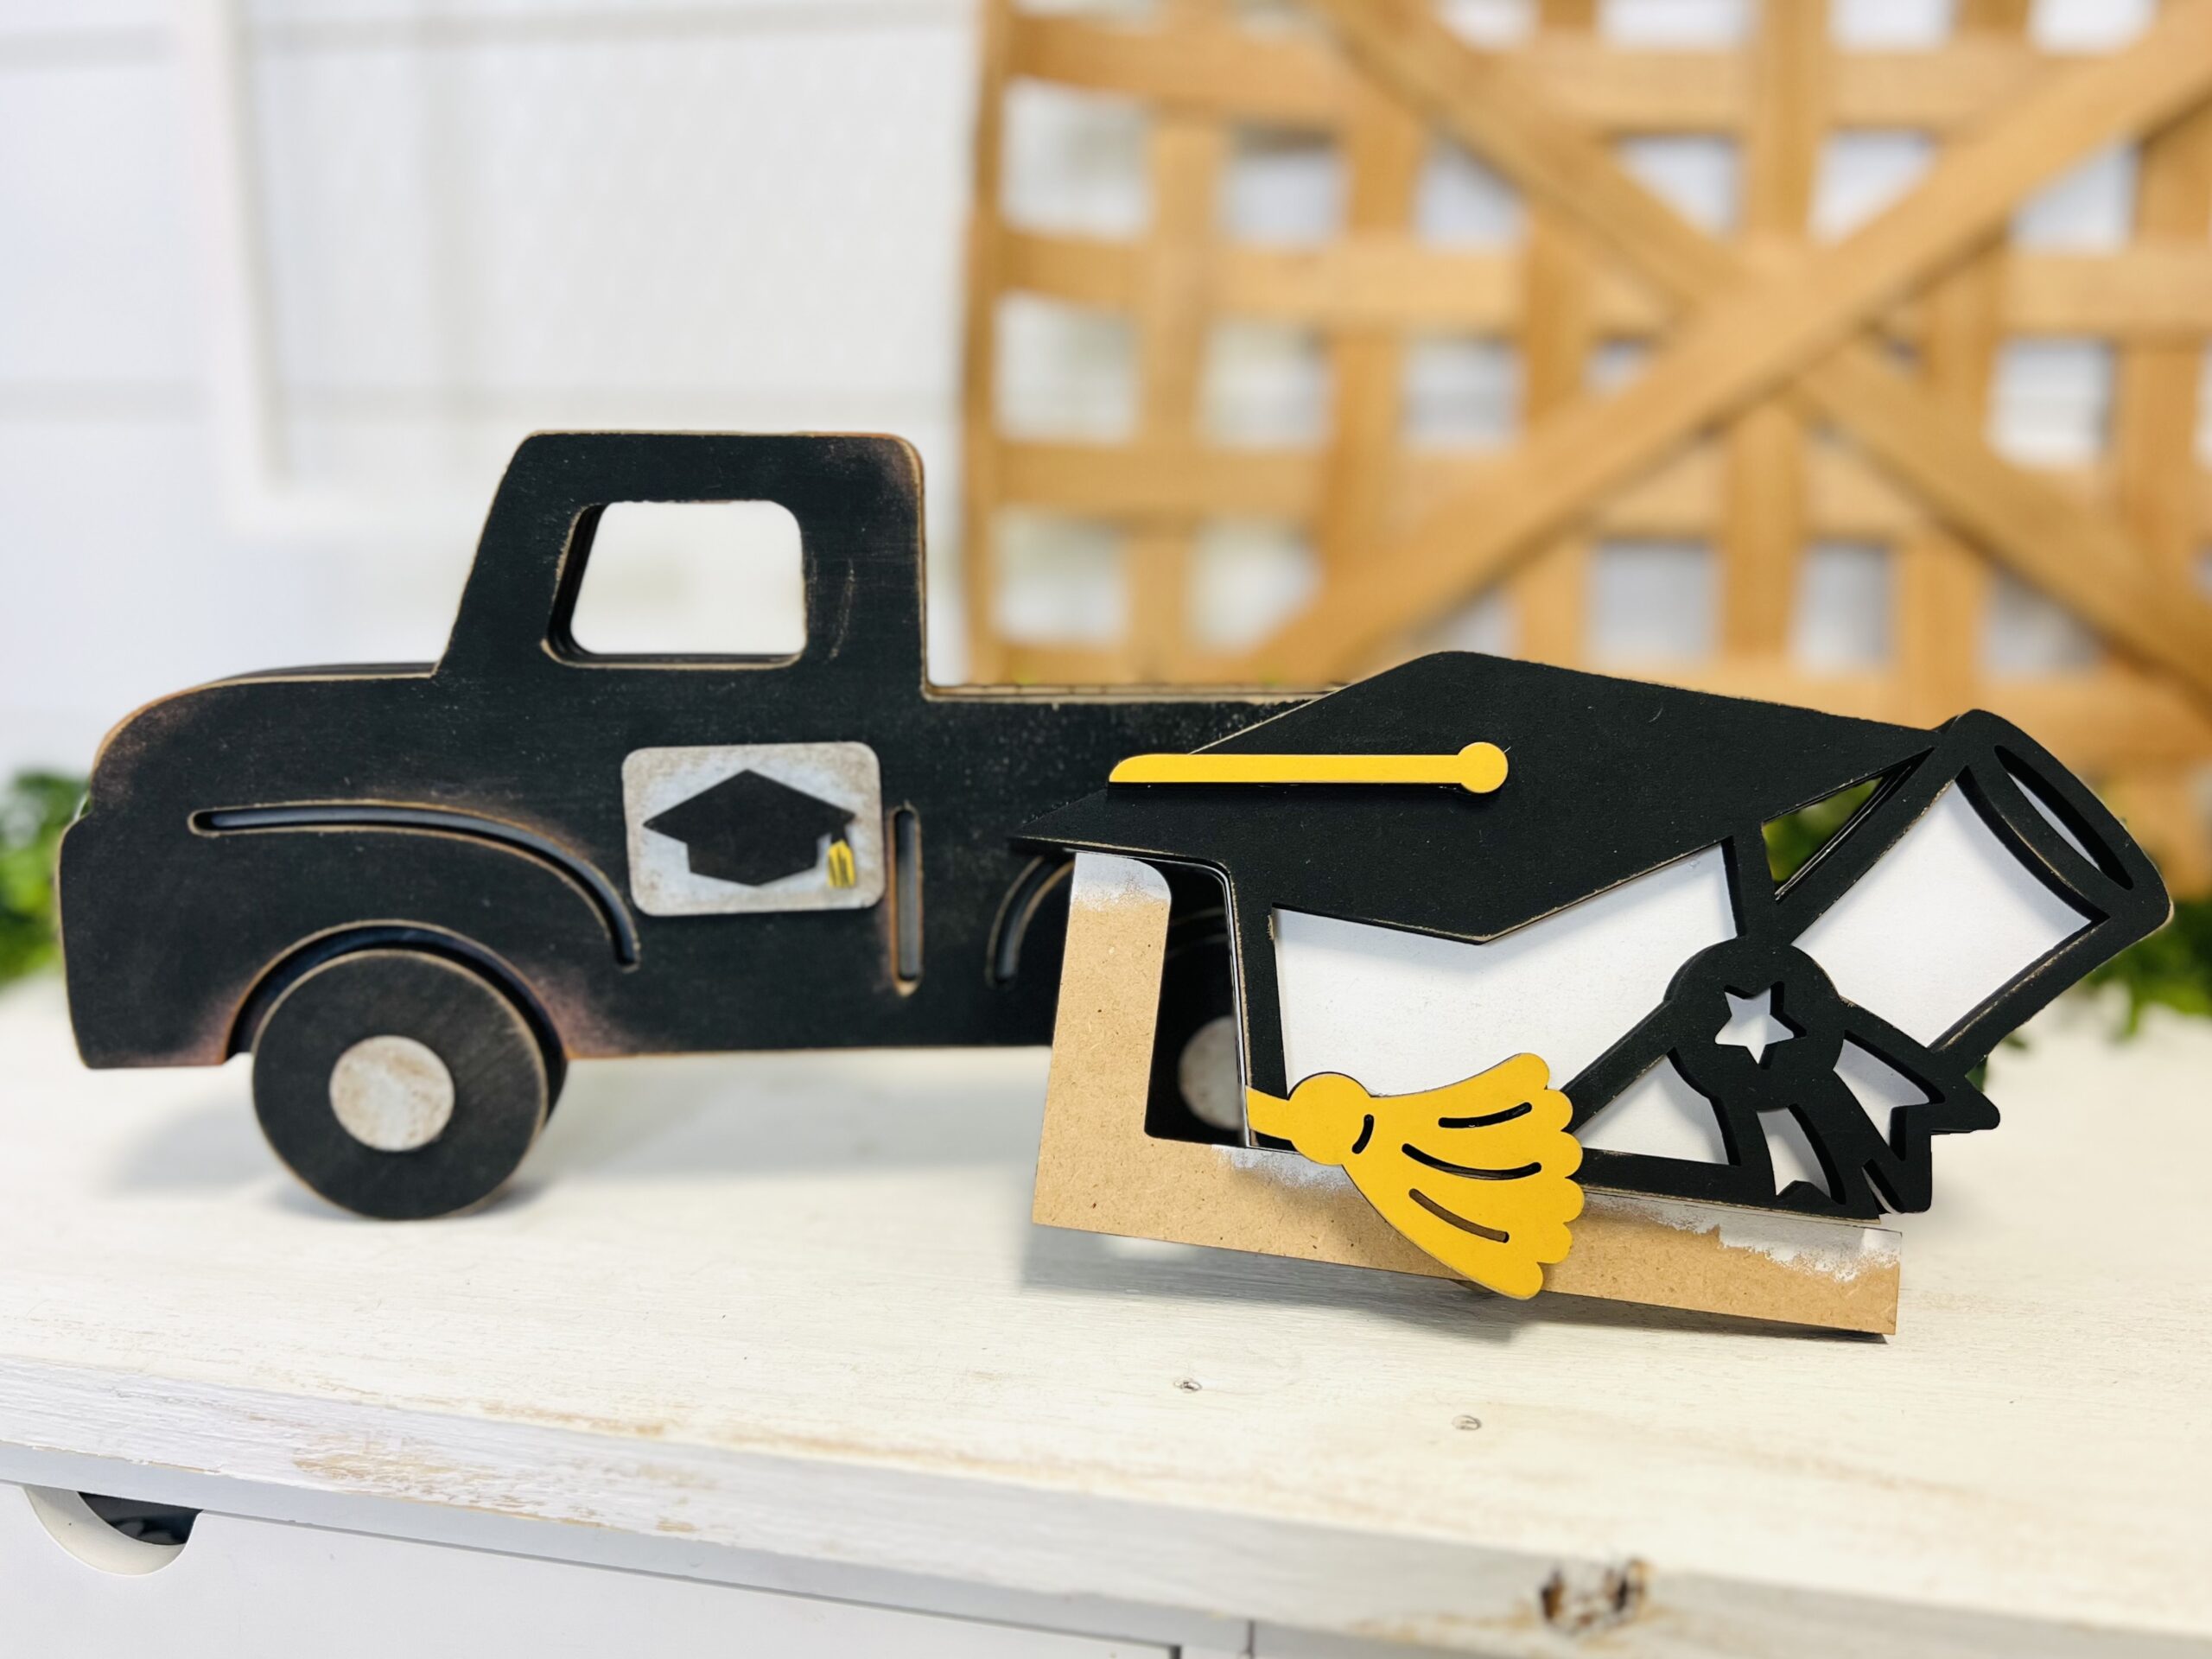 This is a farmhouse truck with an interchangeable graduation hat theme for crafting. This is a finished painted variation of the cutout set.